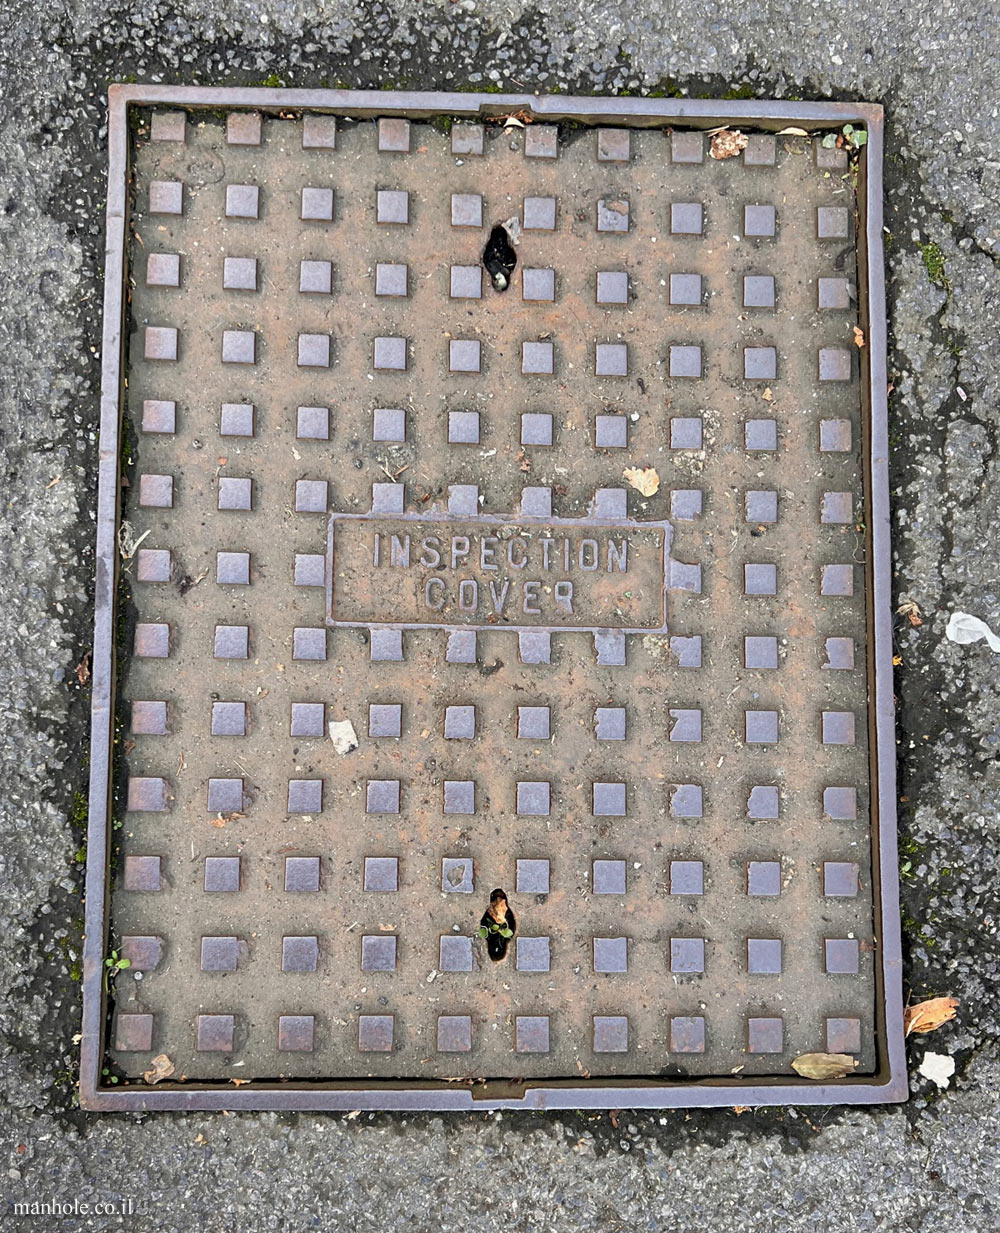 Durham - Inspection Cover